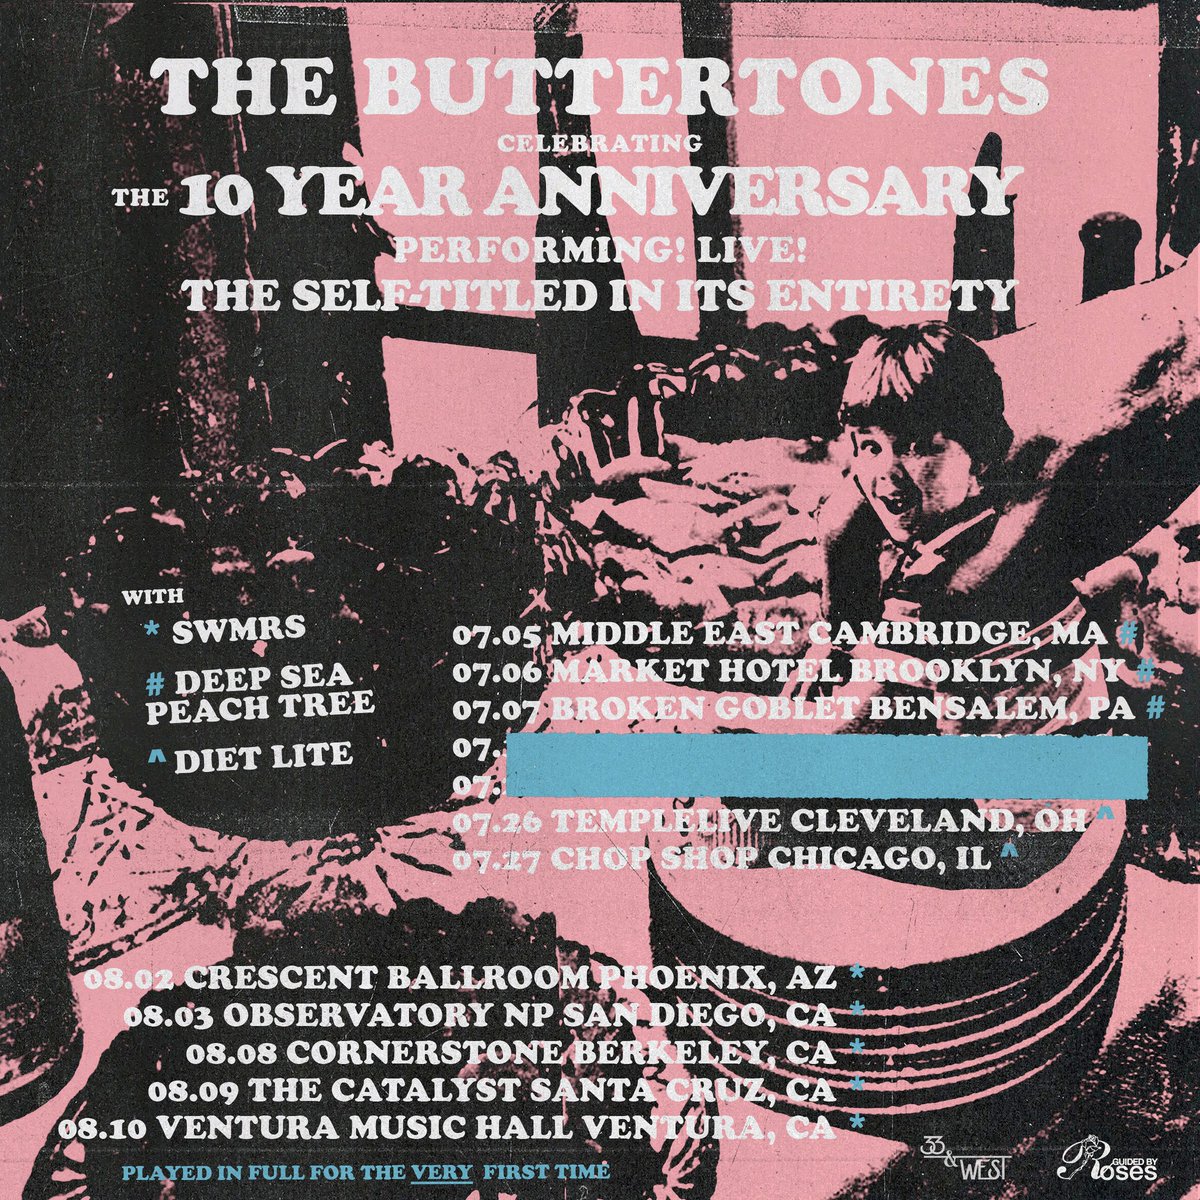 Excited to announce 10th anniversary tour dates for @Btonesband, tickets for Boston Brooklyn and PA at scenicnyc.com